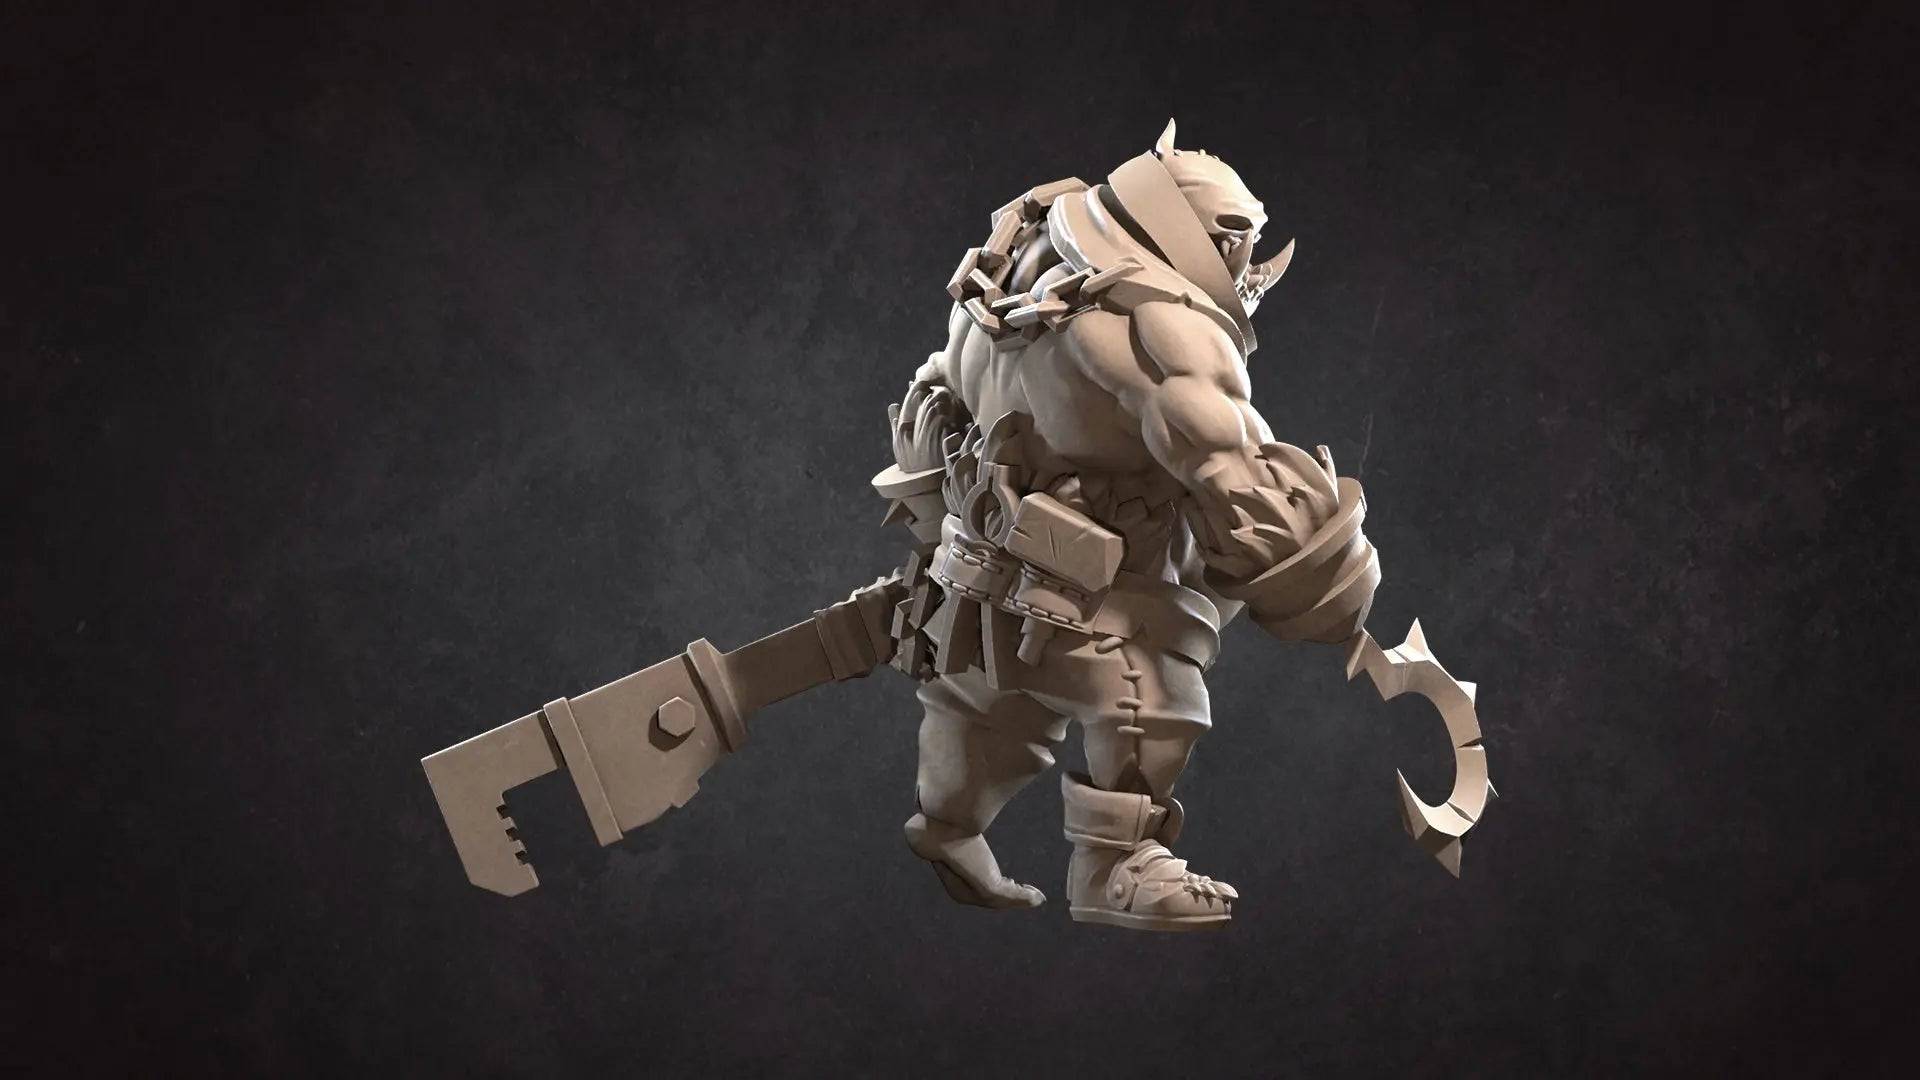 Precious, Blacksmith's Assistant Dragging a Huge Wrench | D&D Miniature TTRPG Character | Bite the Bullet - Tattles Told 3D